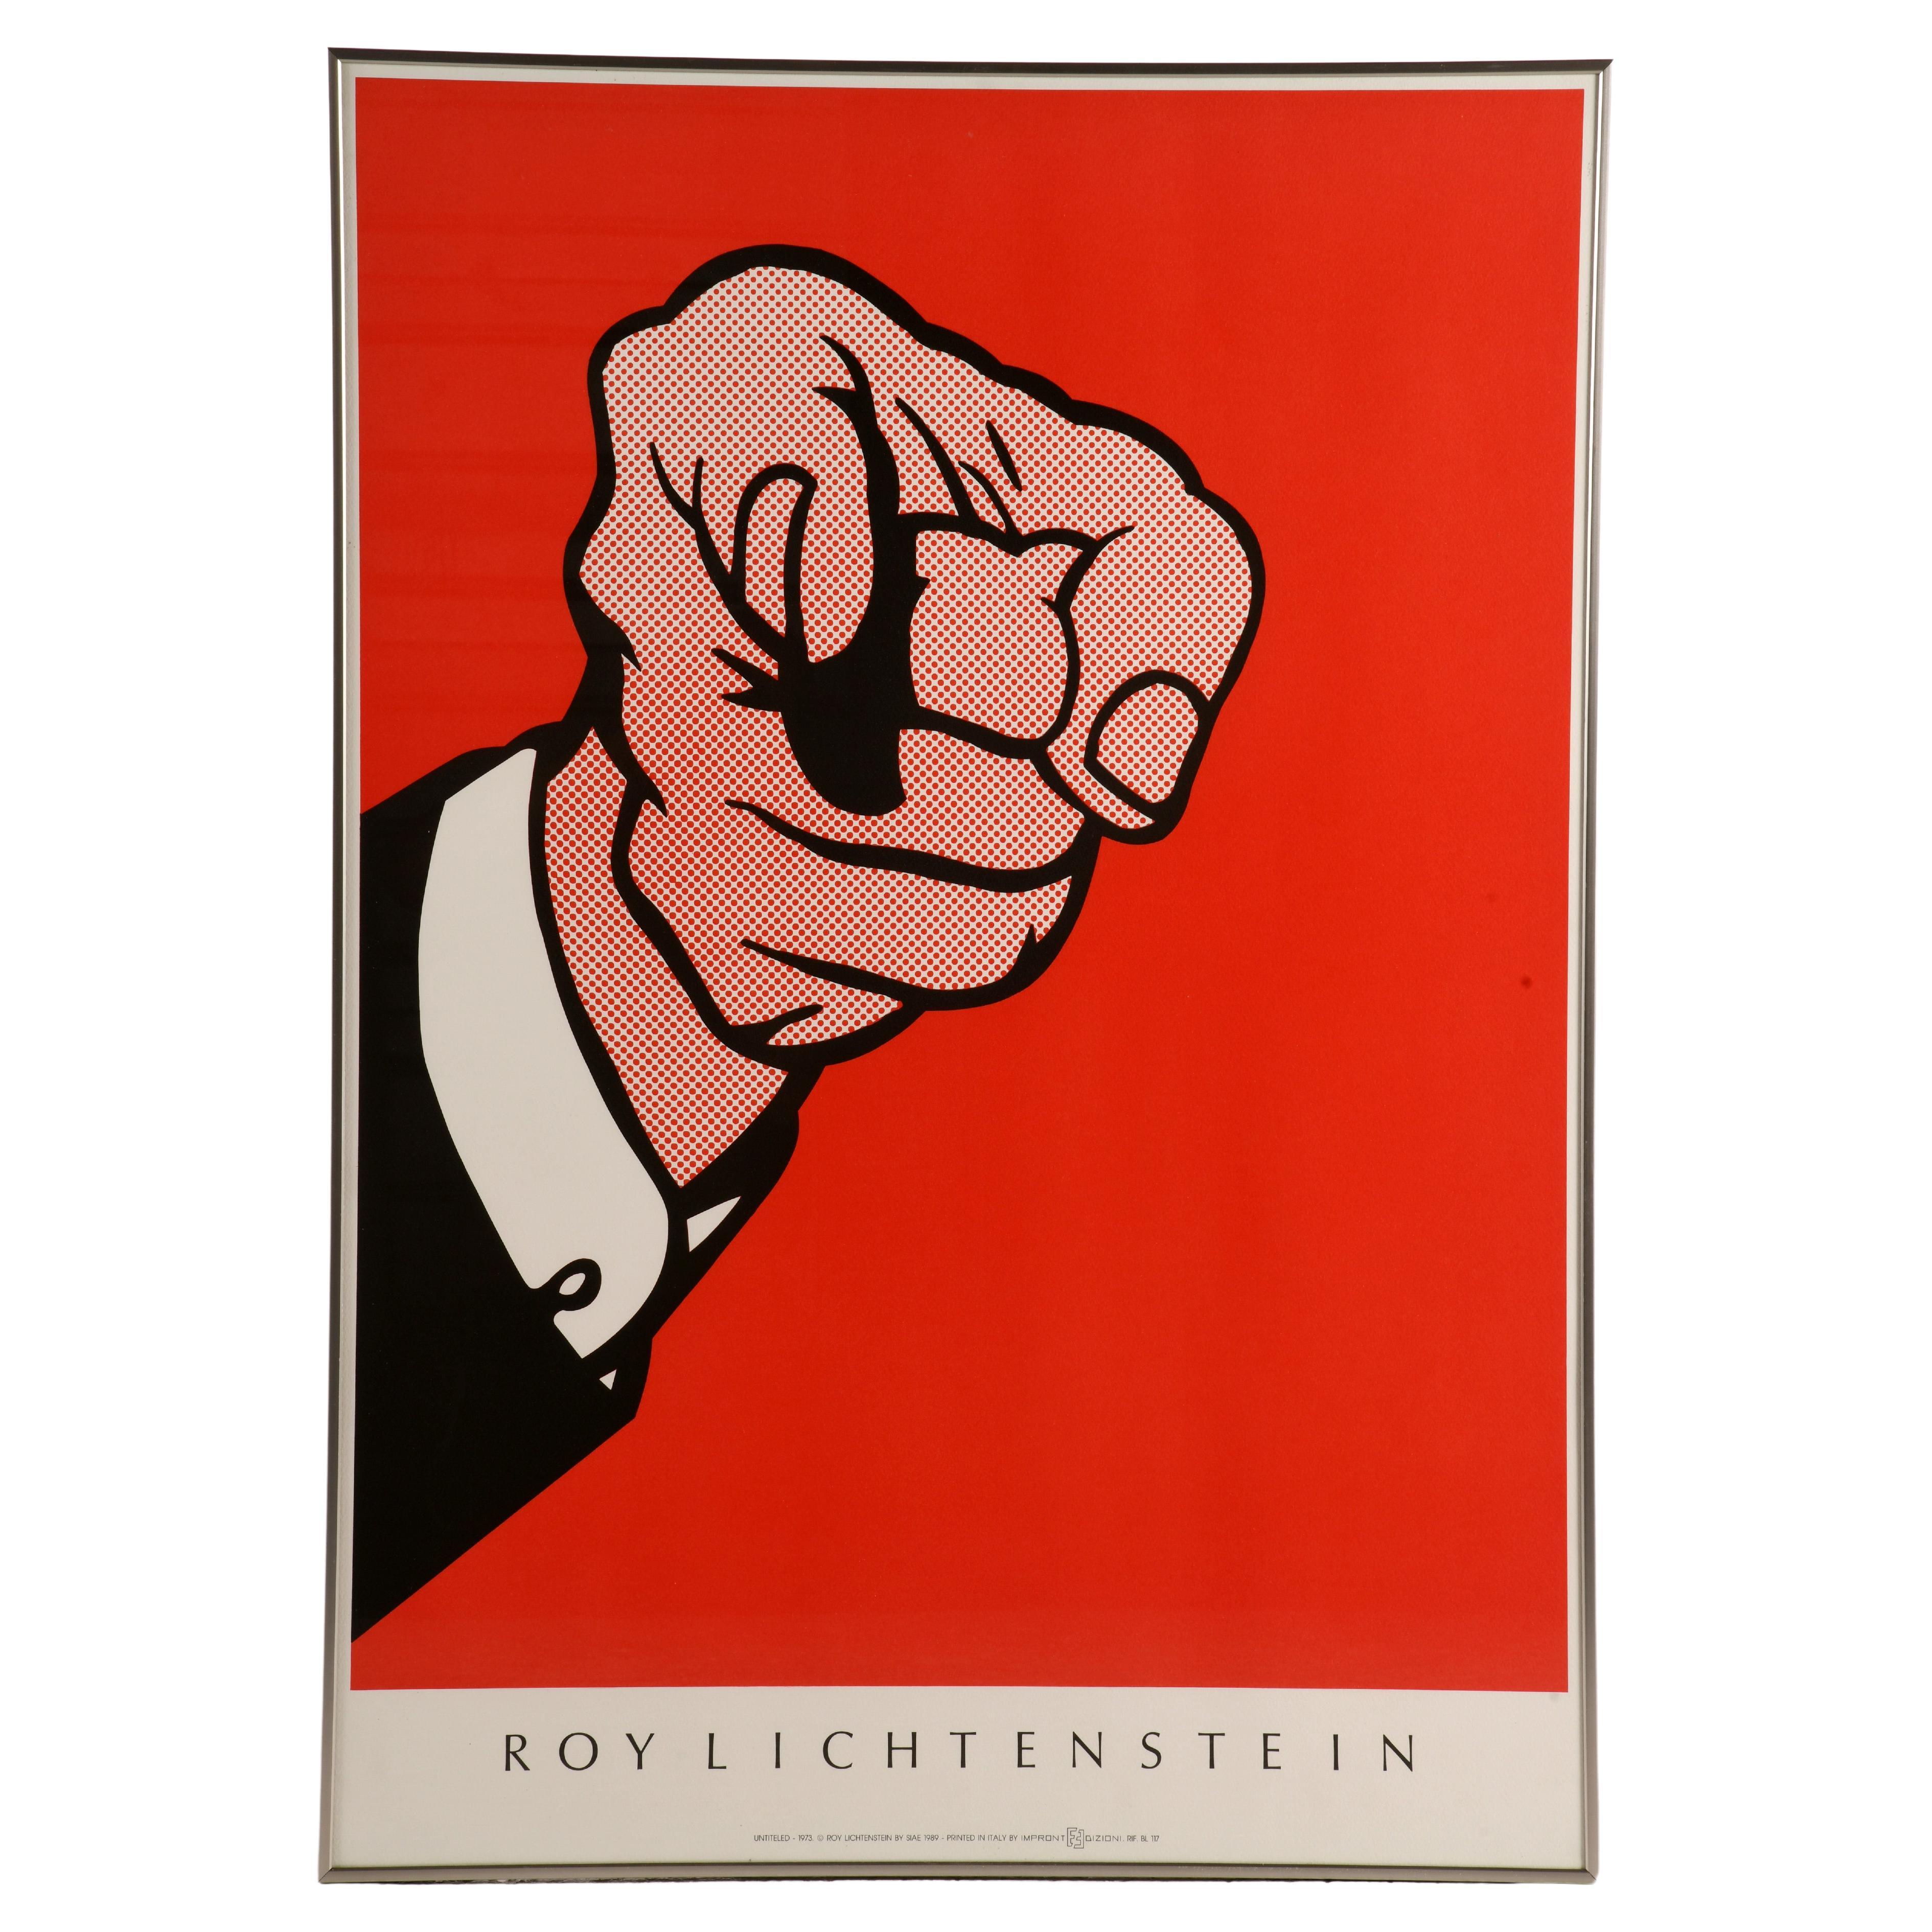 Roy Lichtenstein poster printed in 1989 by Impronte Edizioni on an Arches paper